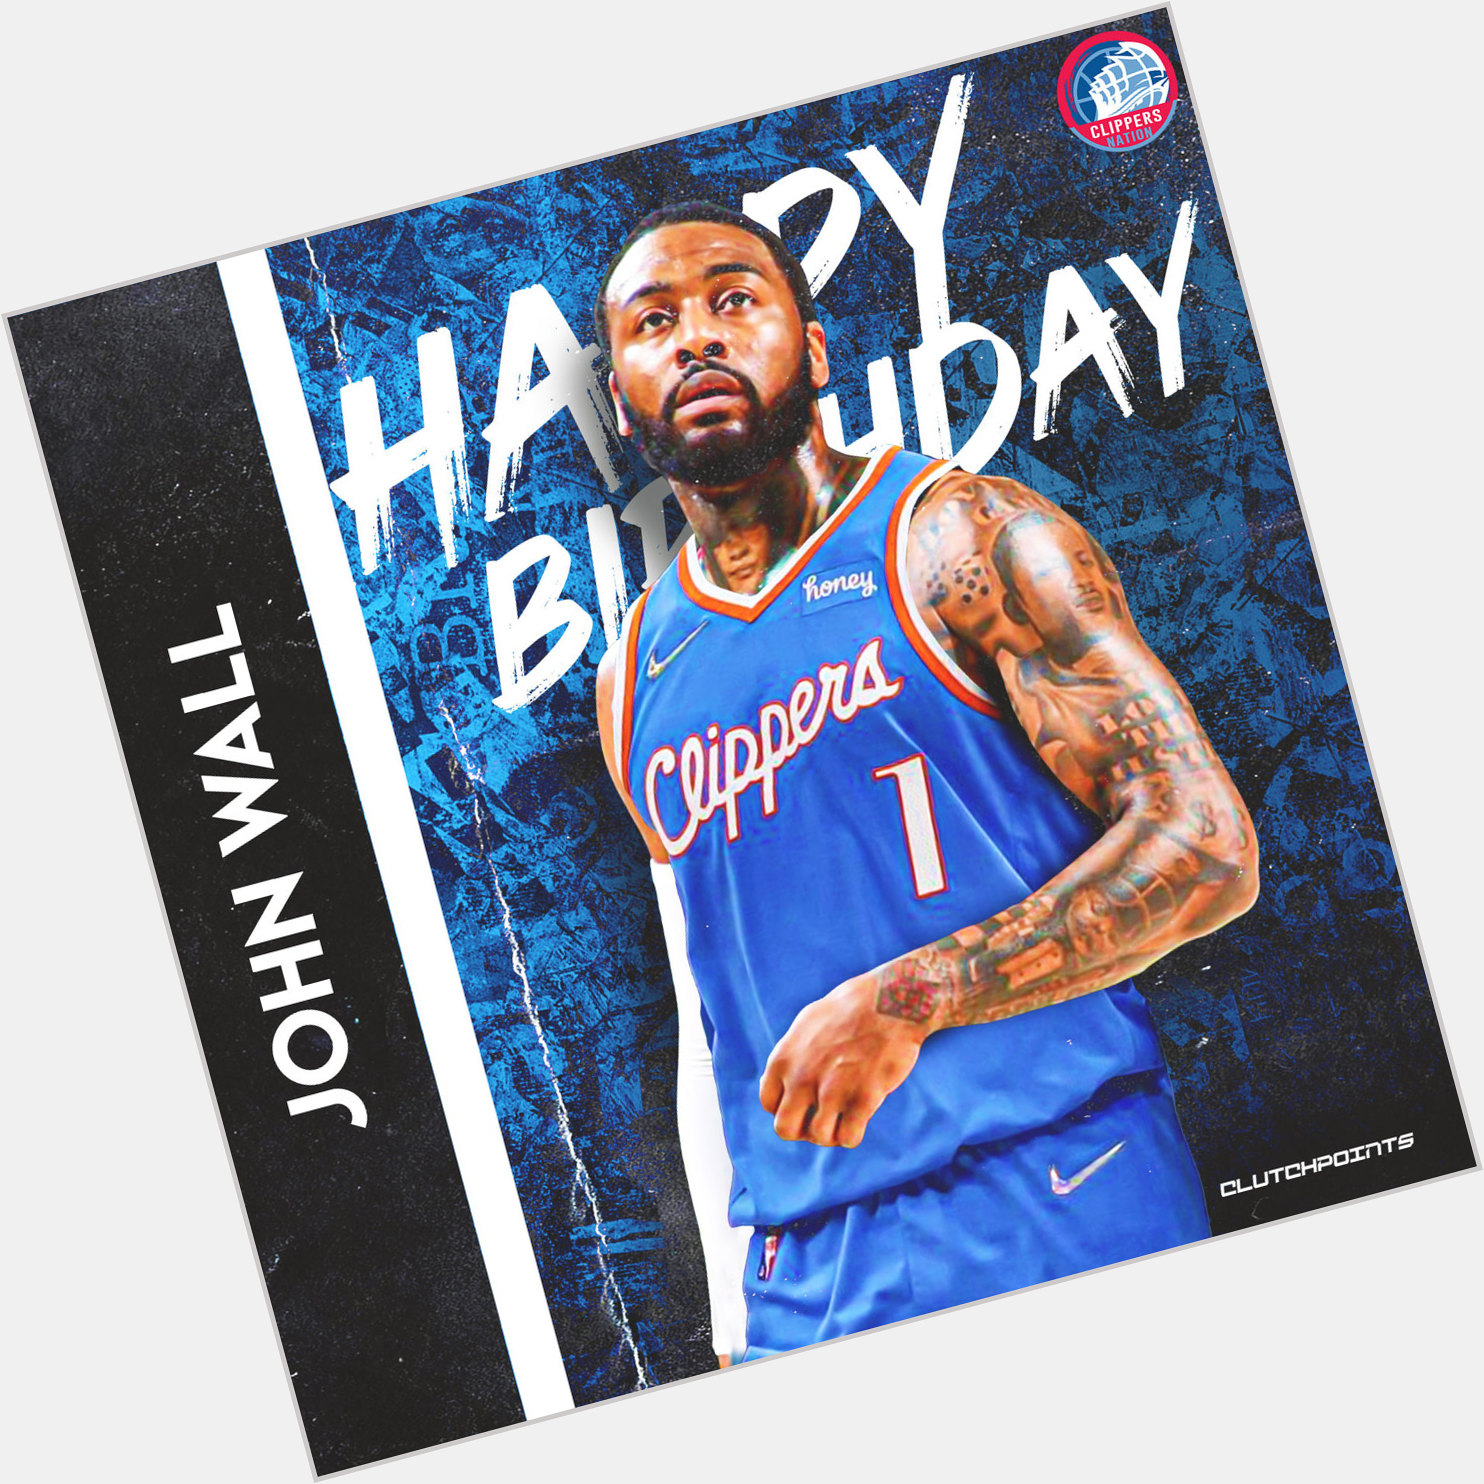 Clippers Nation, join us in greeting 5x NBA All-Star, John Wall, a happy 32nd birthday! 